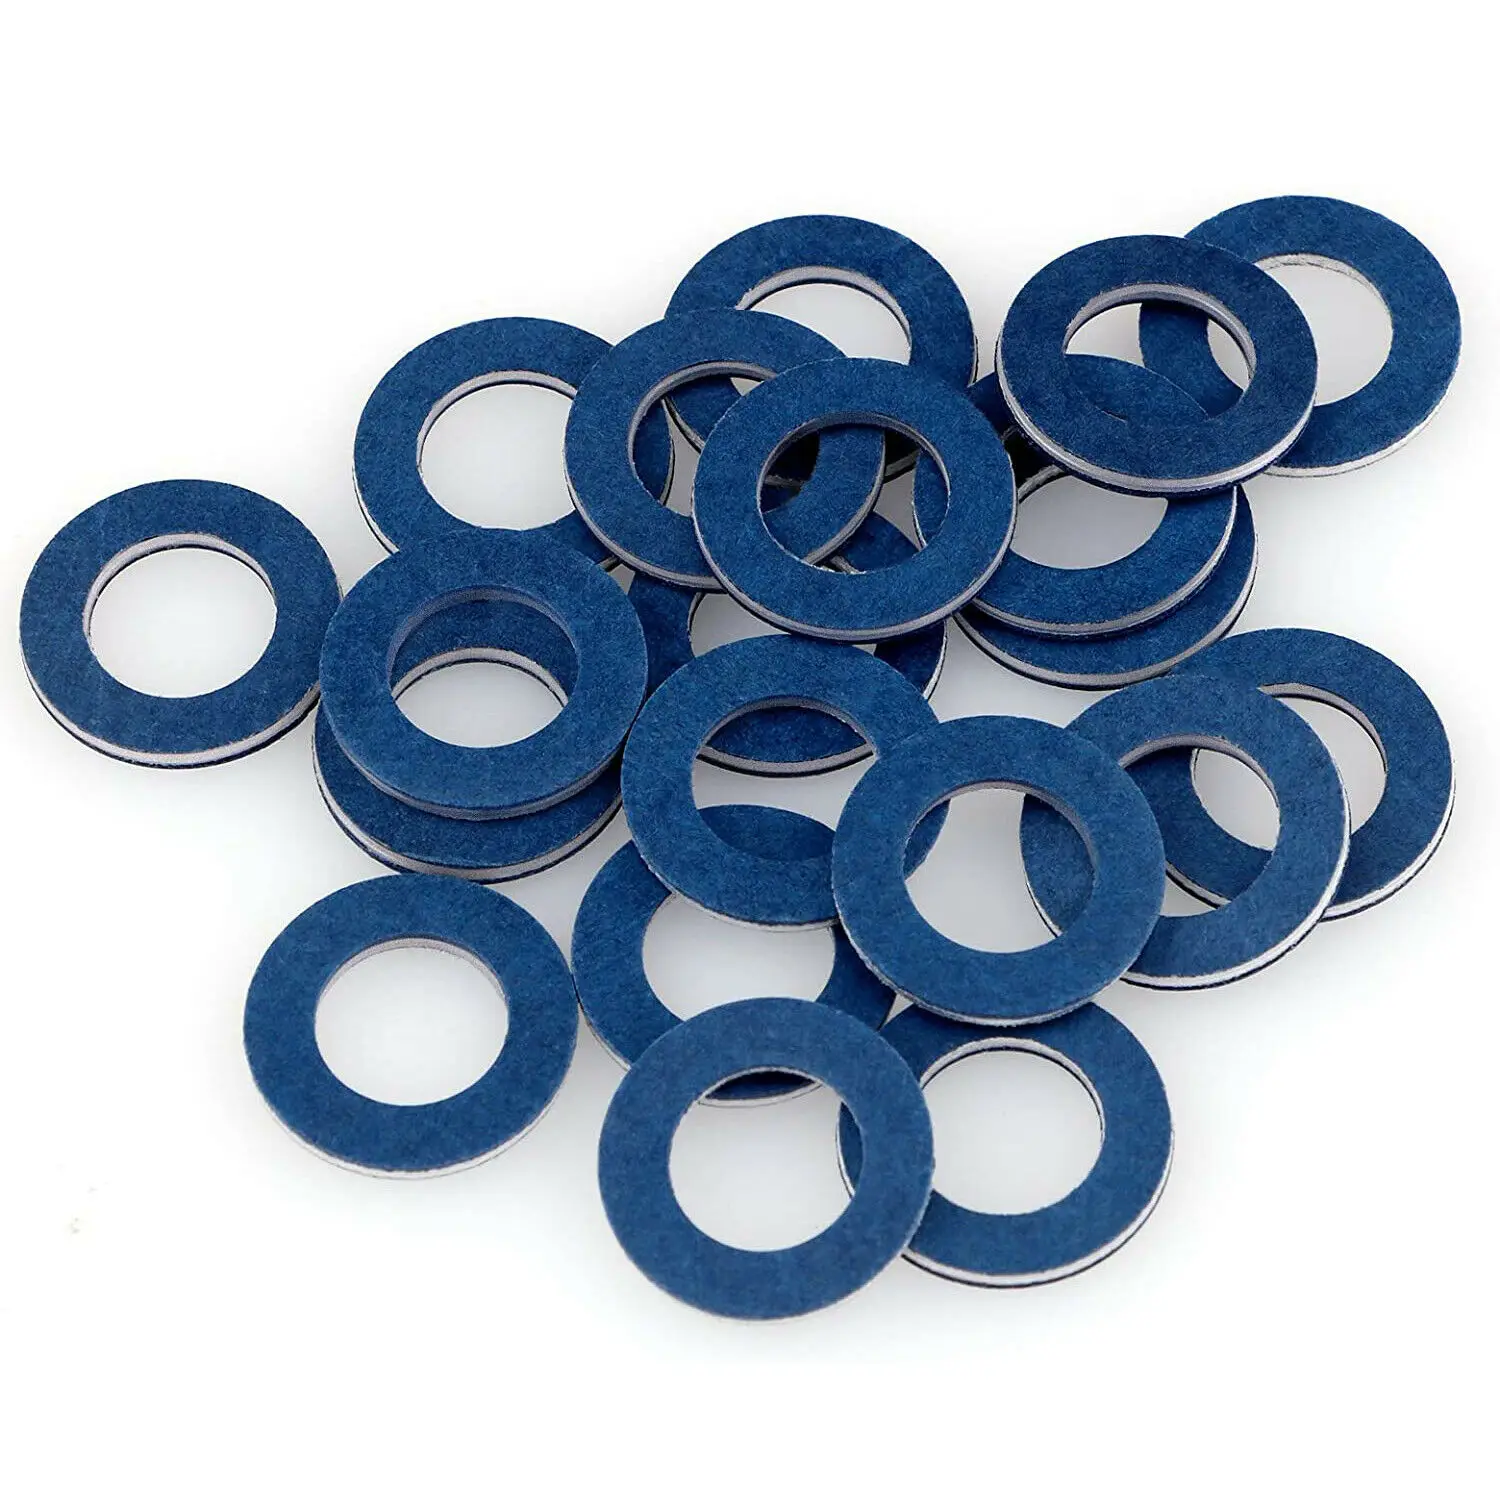 20 Pieces Oil Drain Plug Gasket Crush Washer Parts for All Models of Toyota and Lexus Cars 